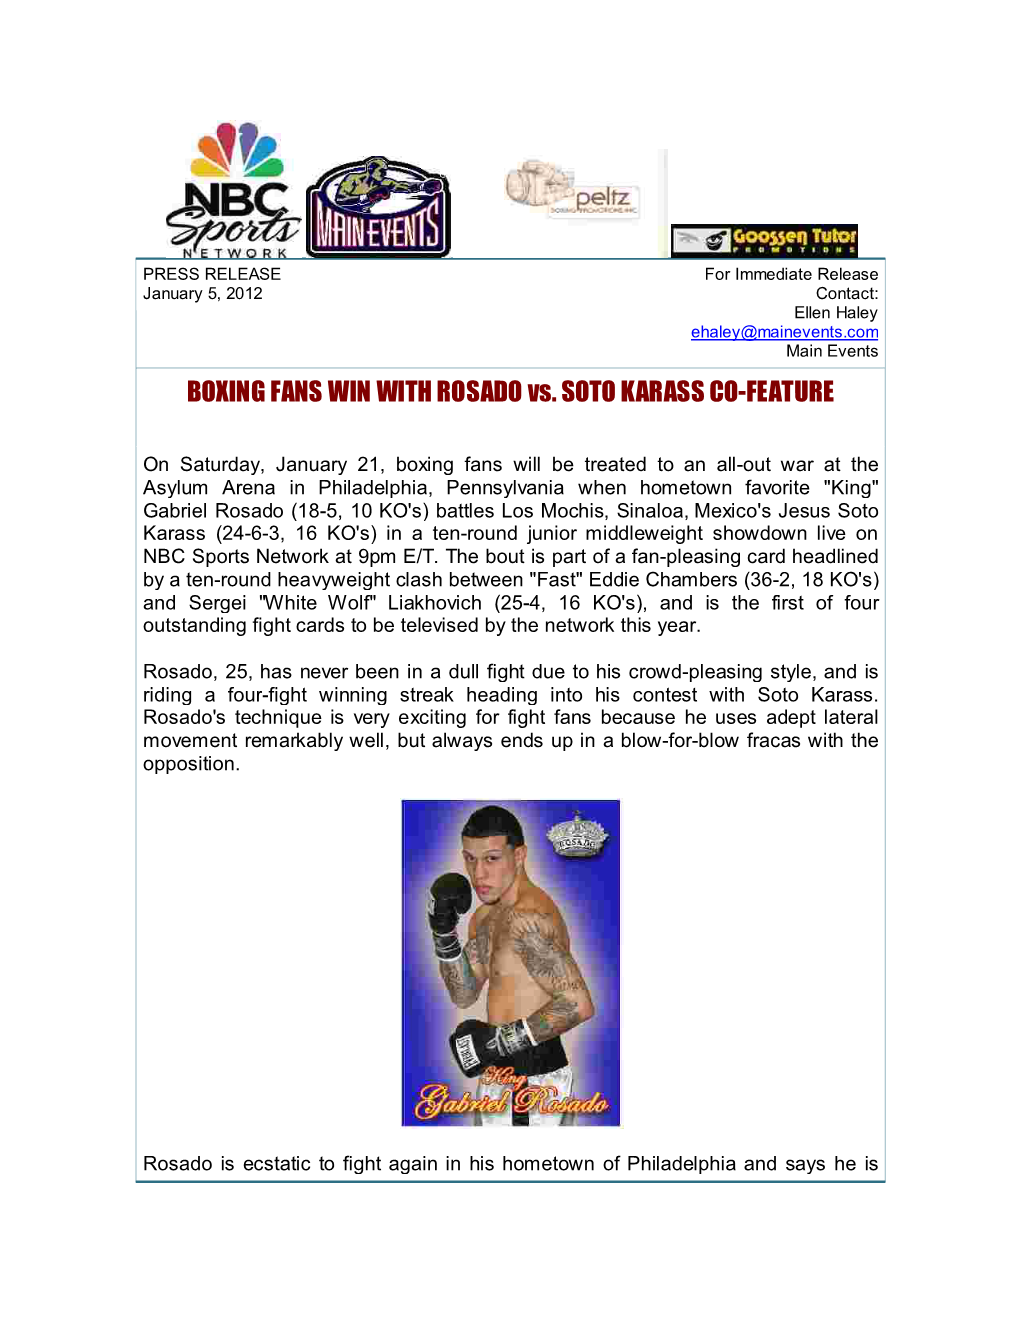 BOXING FANS WIN with ROSADO Vs. SOTO KARASS CO-FEATURE